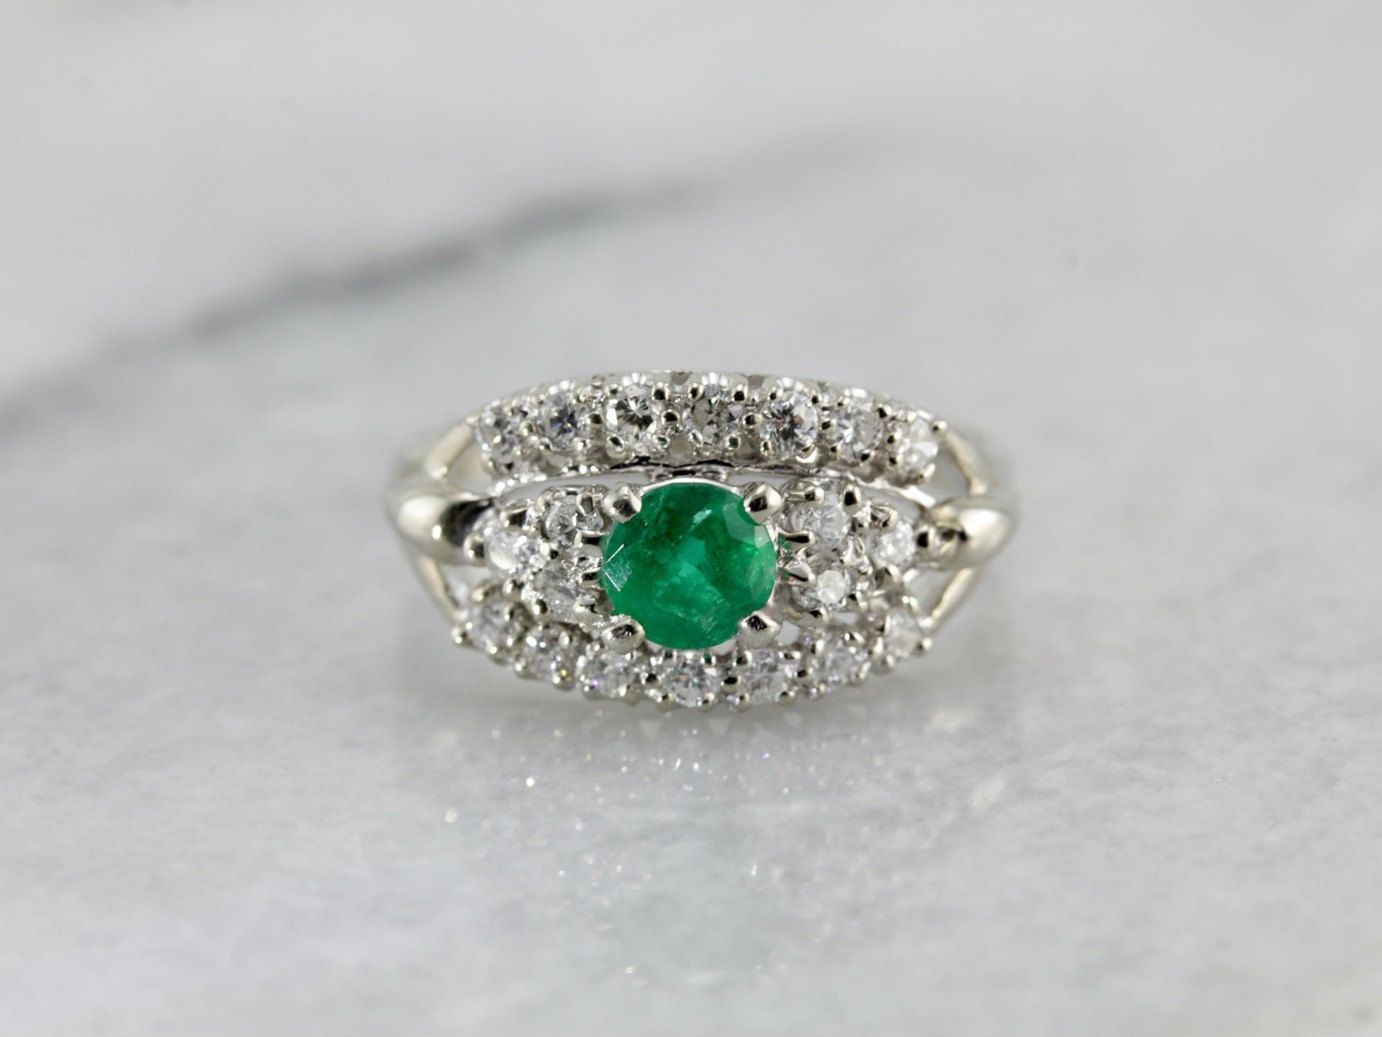 Emerald And Diamond Anniversary Ring In White Gold Umpw6a N Throughout 2019 Diamond Linear Anniversary Bands In White Gold (View 22 of 25)